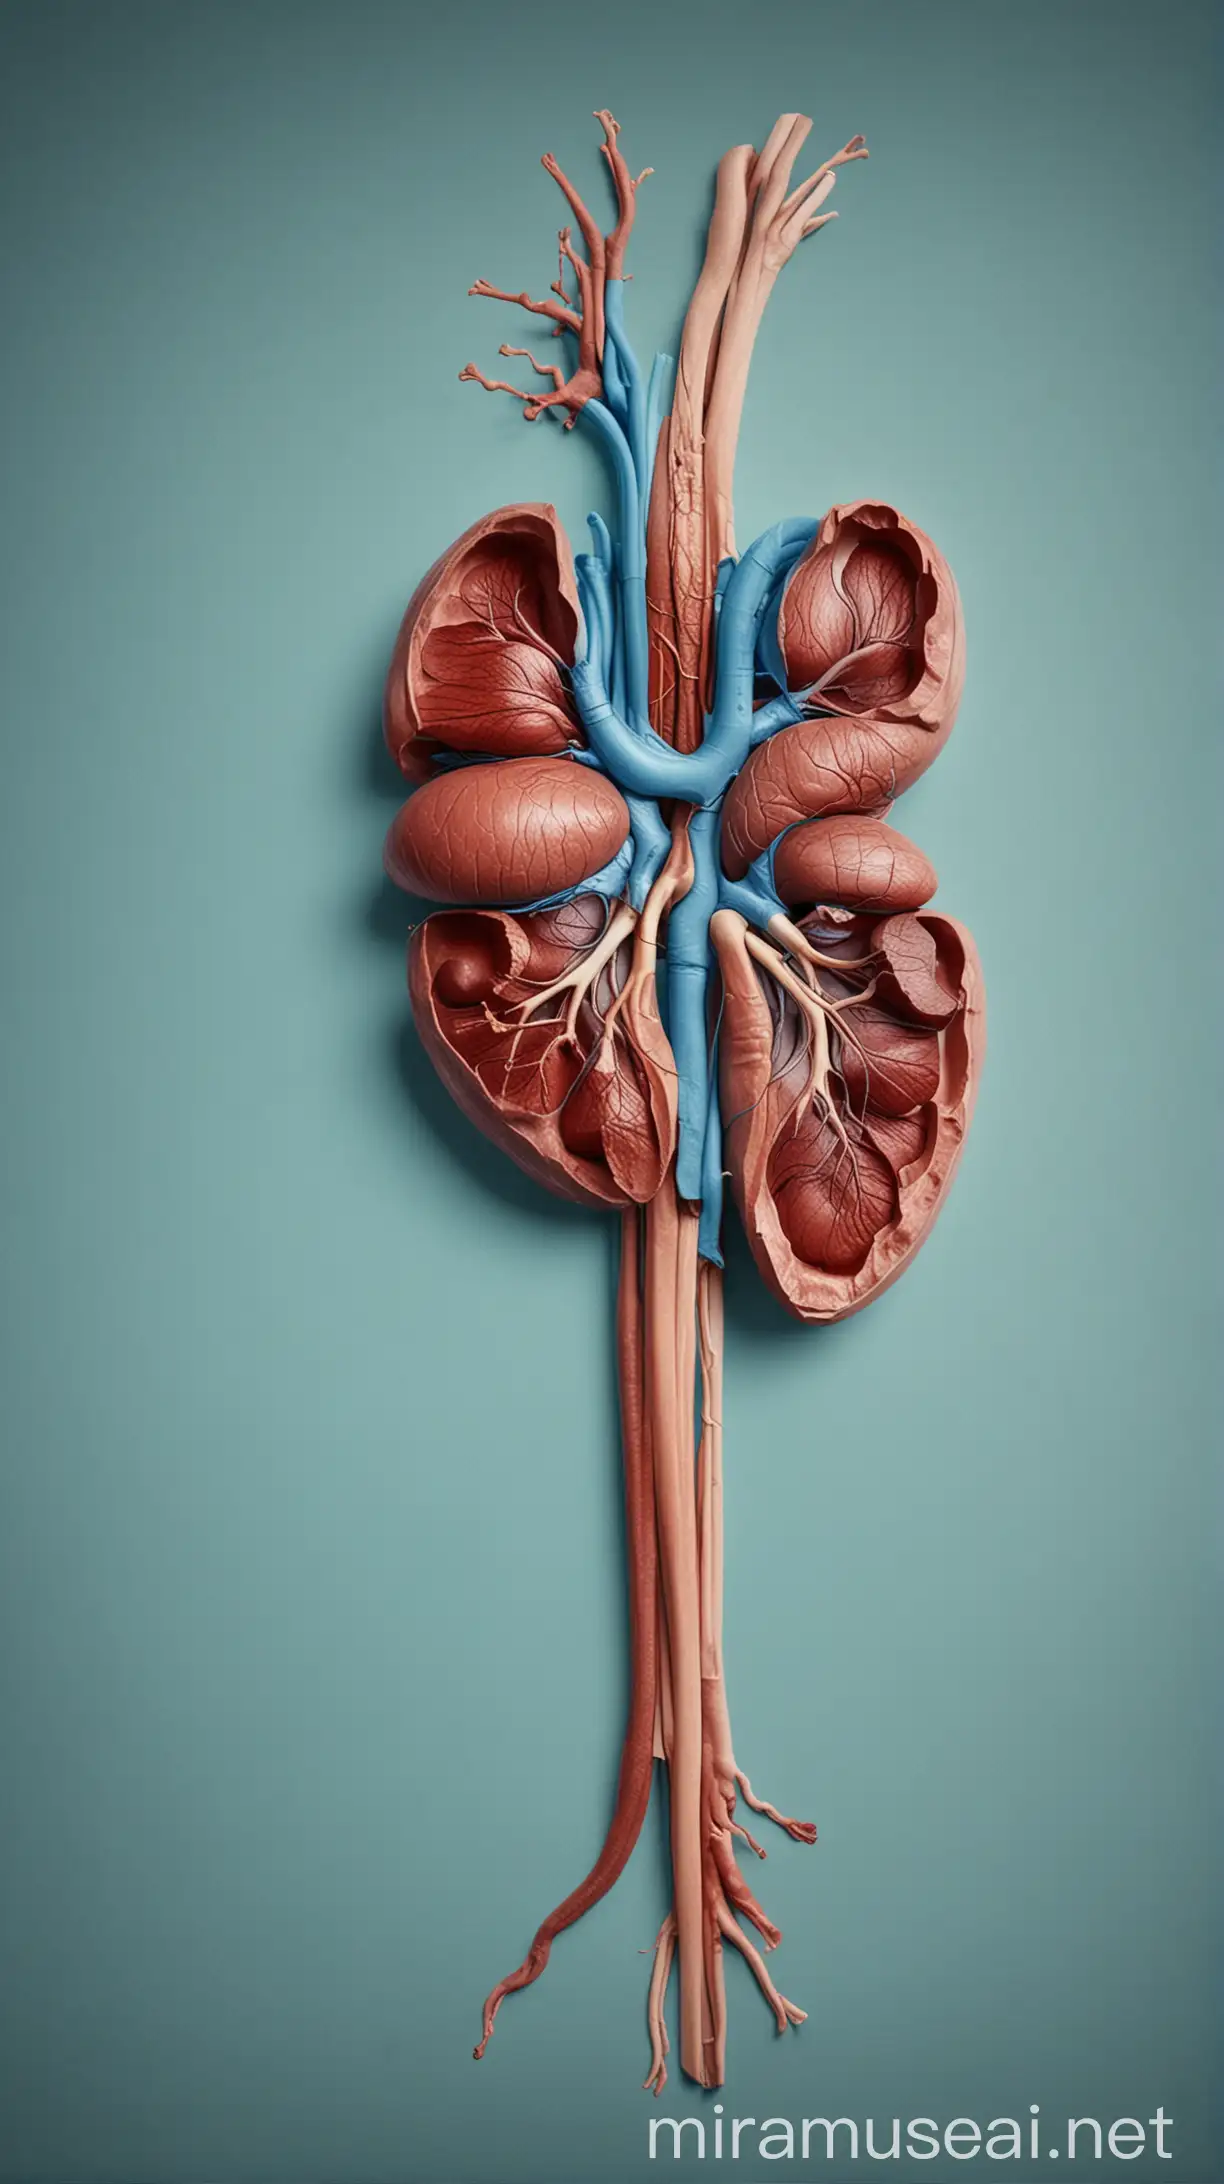 Create an image with human kidney on one side and blank space on the other side for anatomy. In blue background